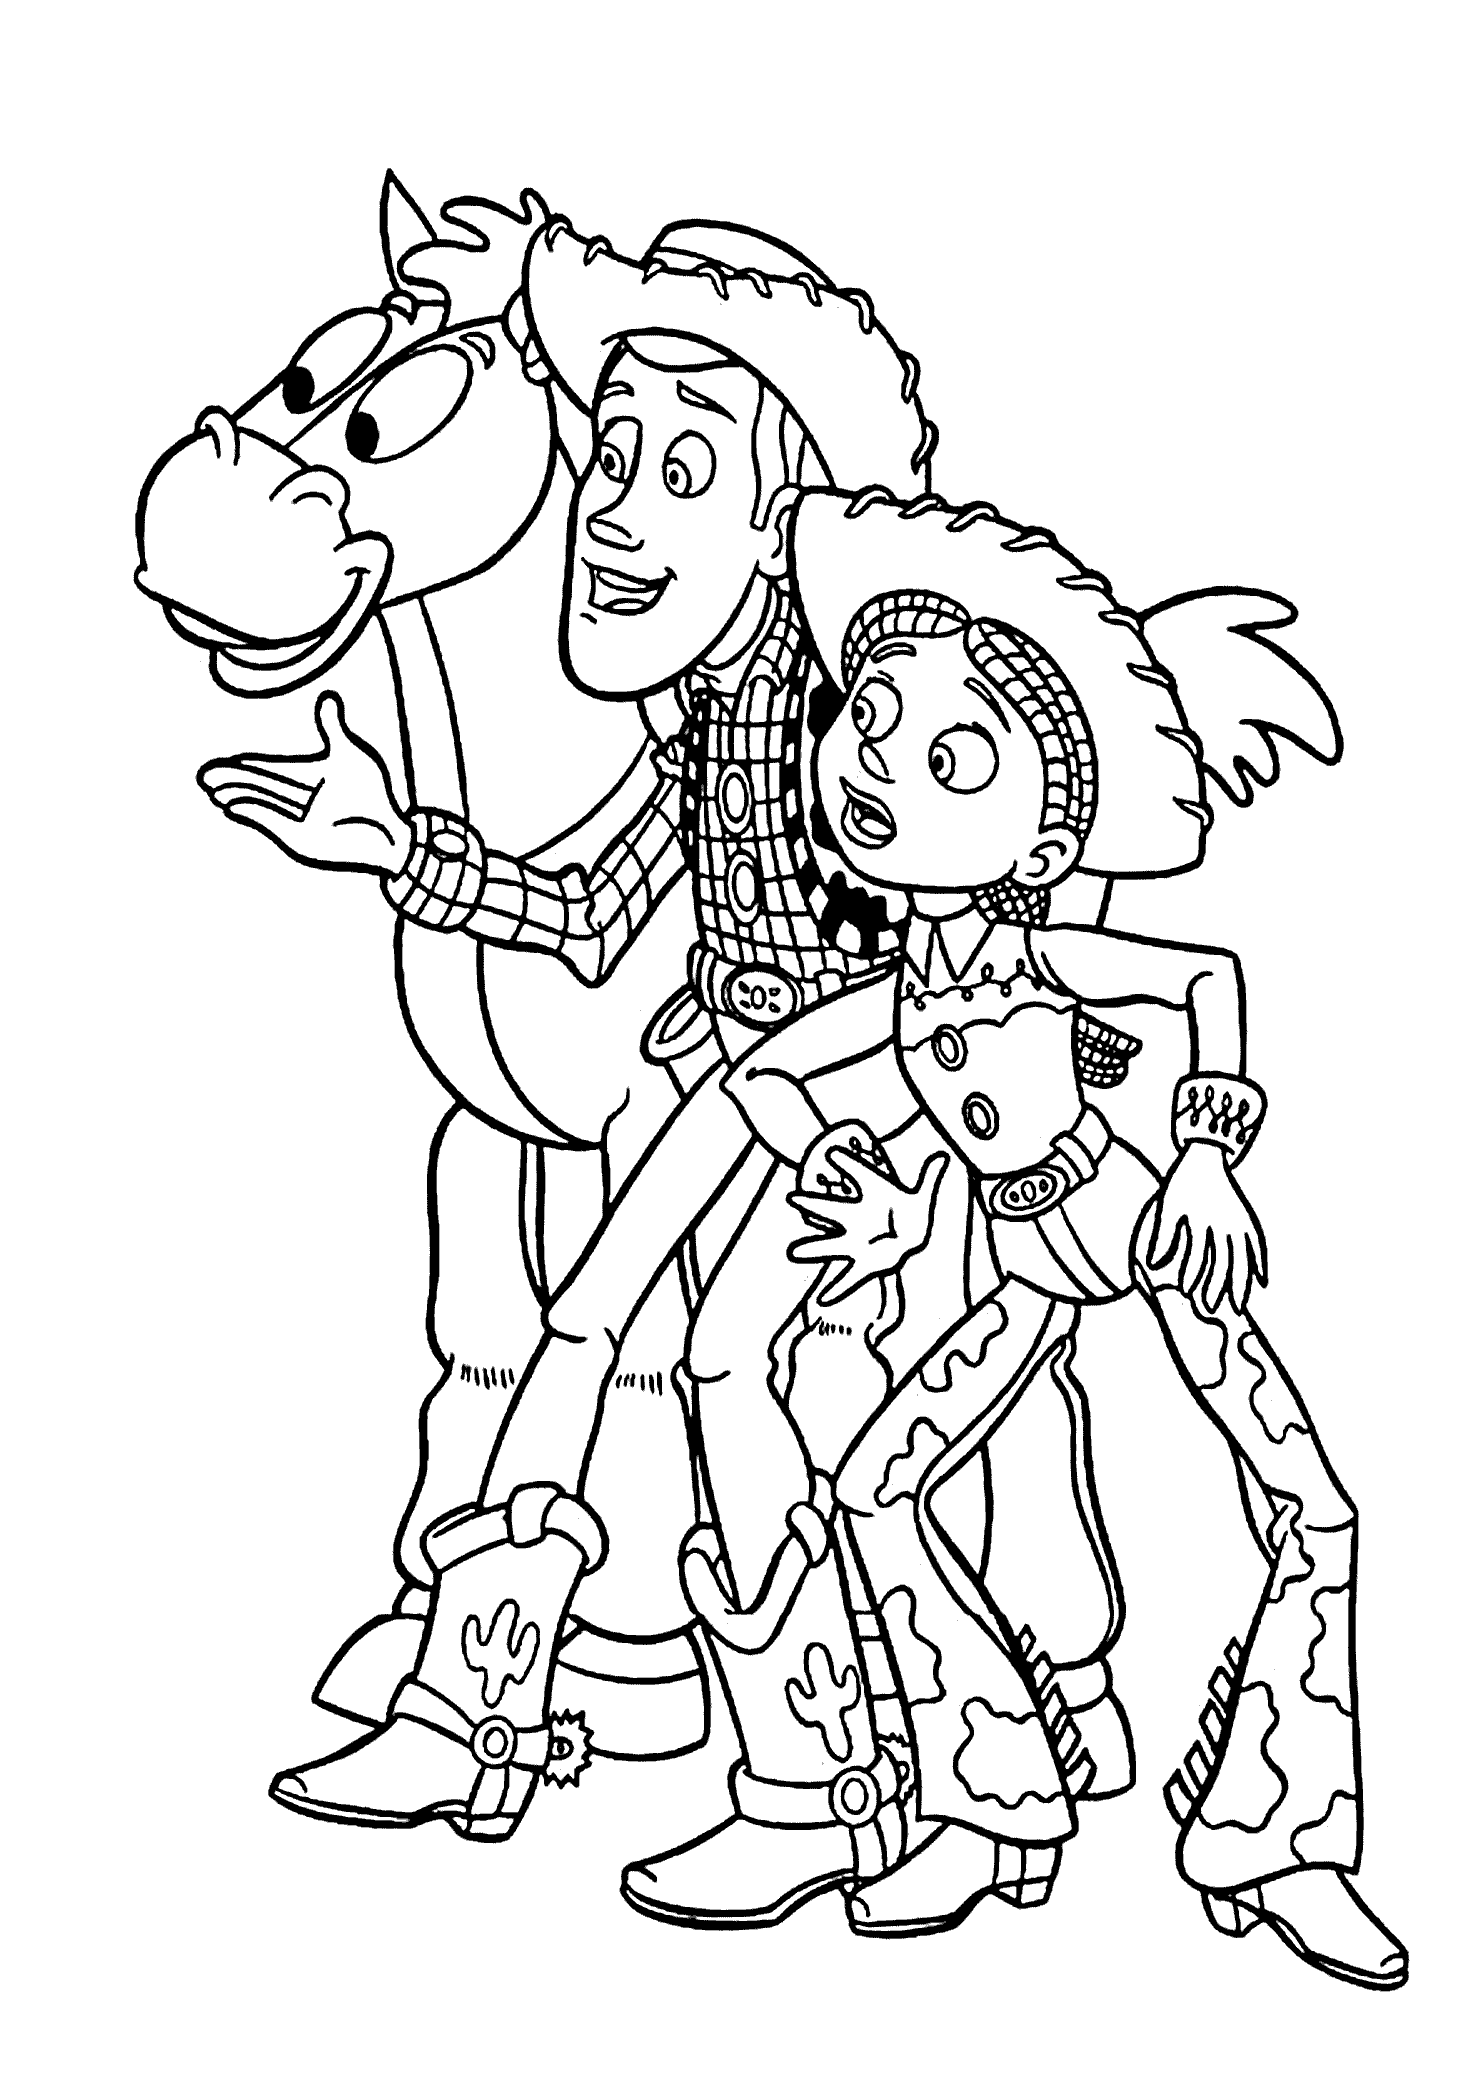 Woody, Jessie and Bullseye Coloring Pages